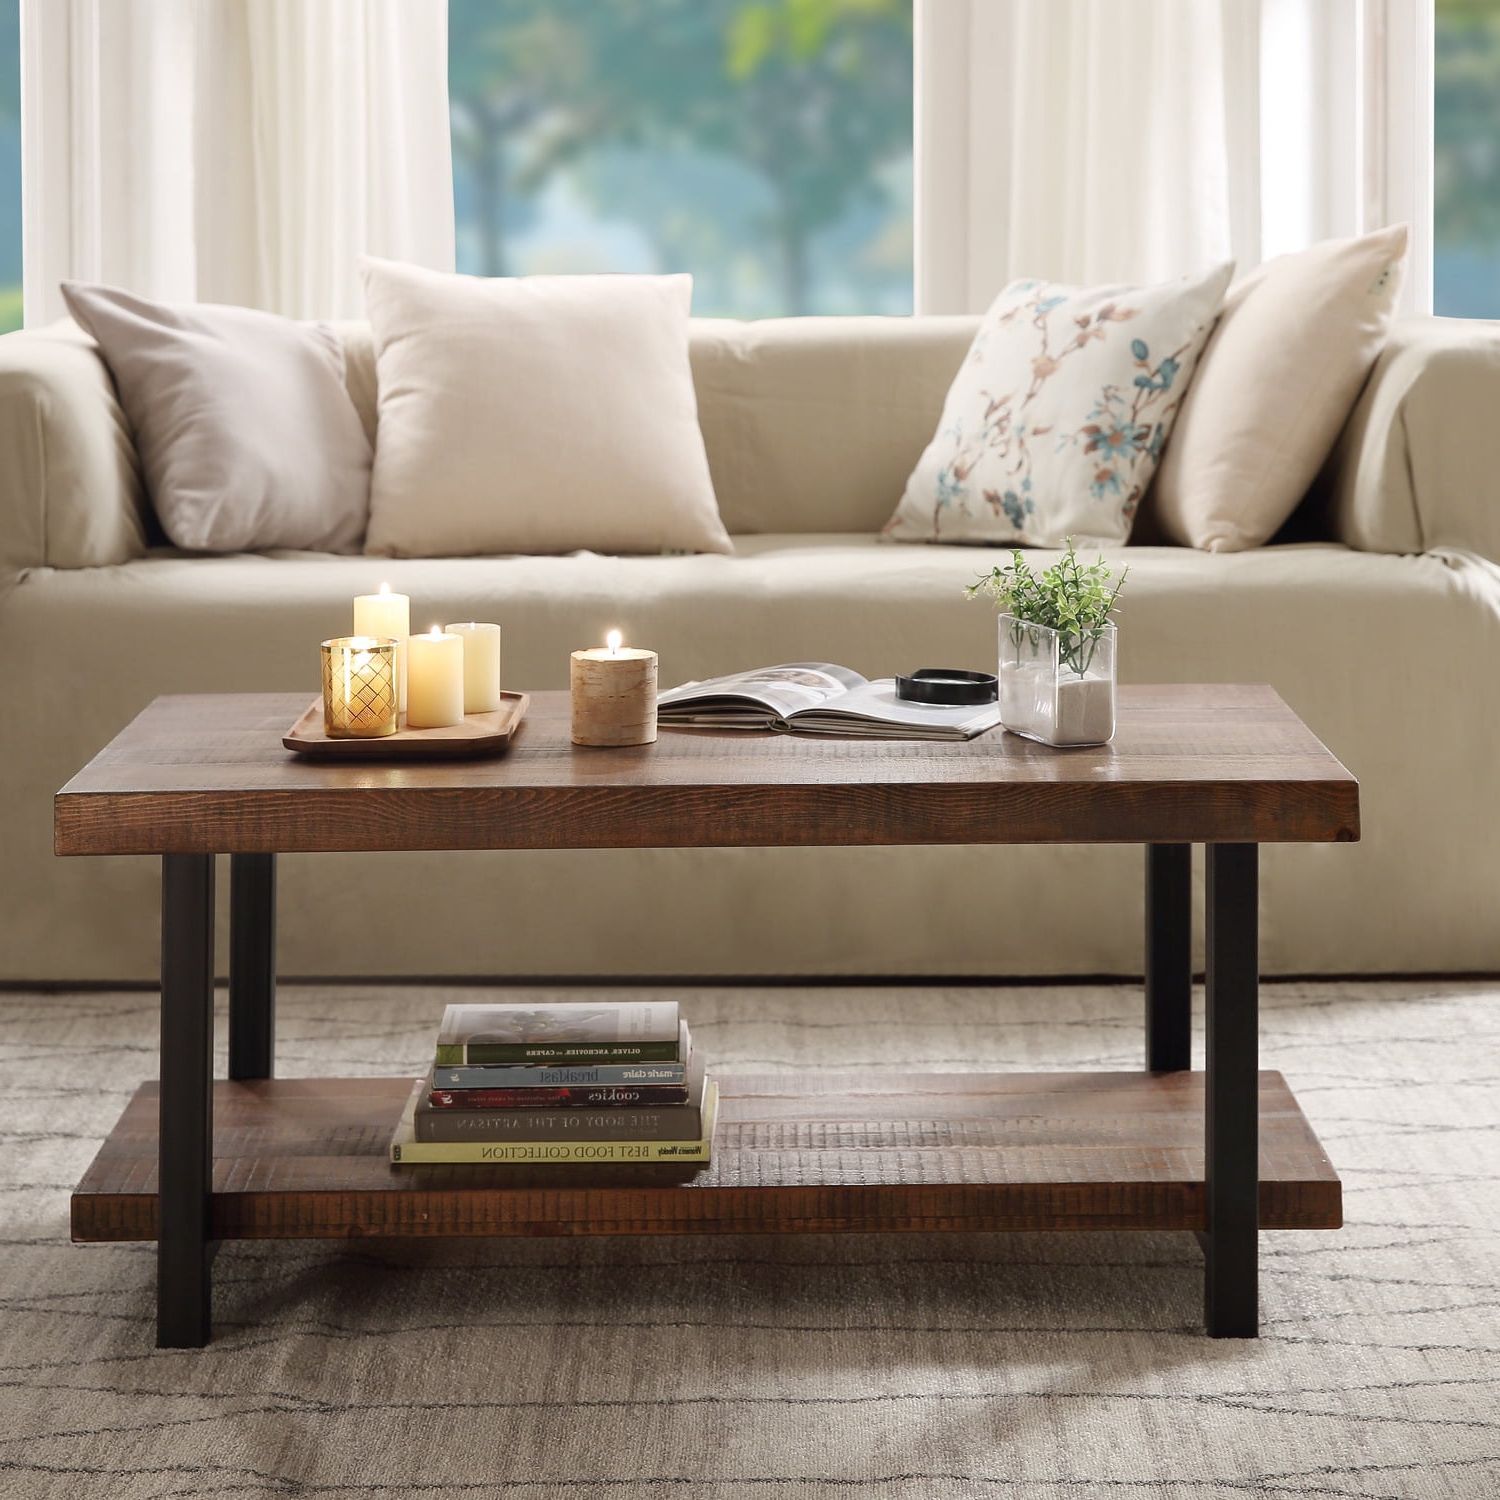 Modern Industrial Coffee Table With Storage Shelf For Living Room For Metal 1 Shelf Coffee Tables (View 14 of 20)